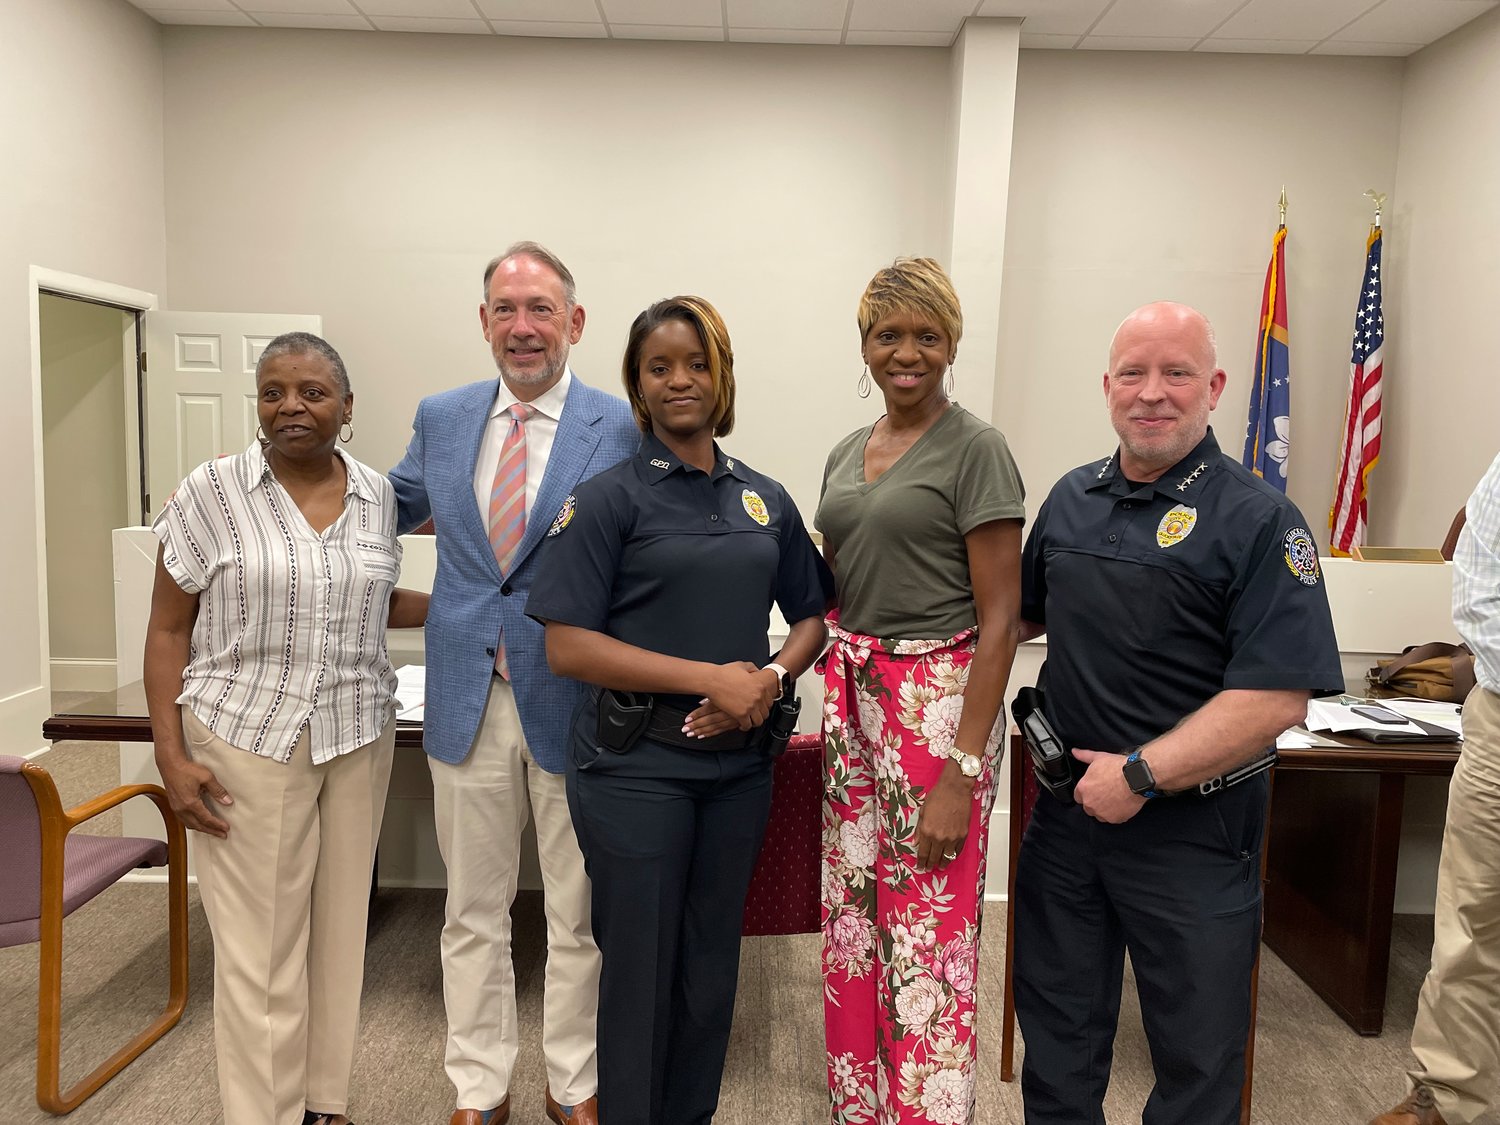 Sage Bowman, center, Gluckstadt’s first female police officer, stands with family and city officials. Pictured, from left: Sharon Johnson, Mayor Walter Morrison, officer Bowman, Sonya Bowman, and Police Chief Wendell Watts.